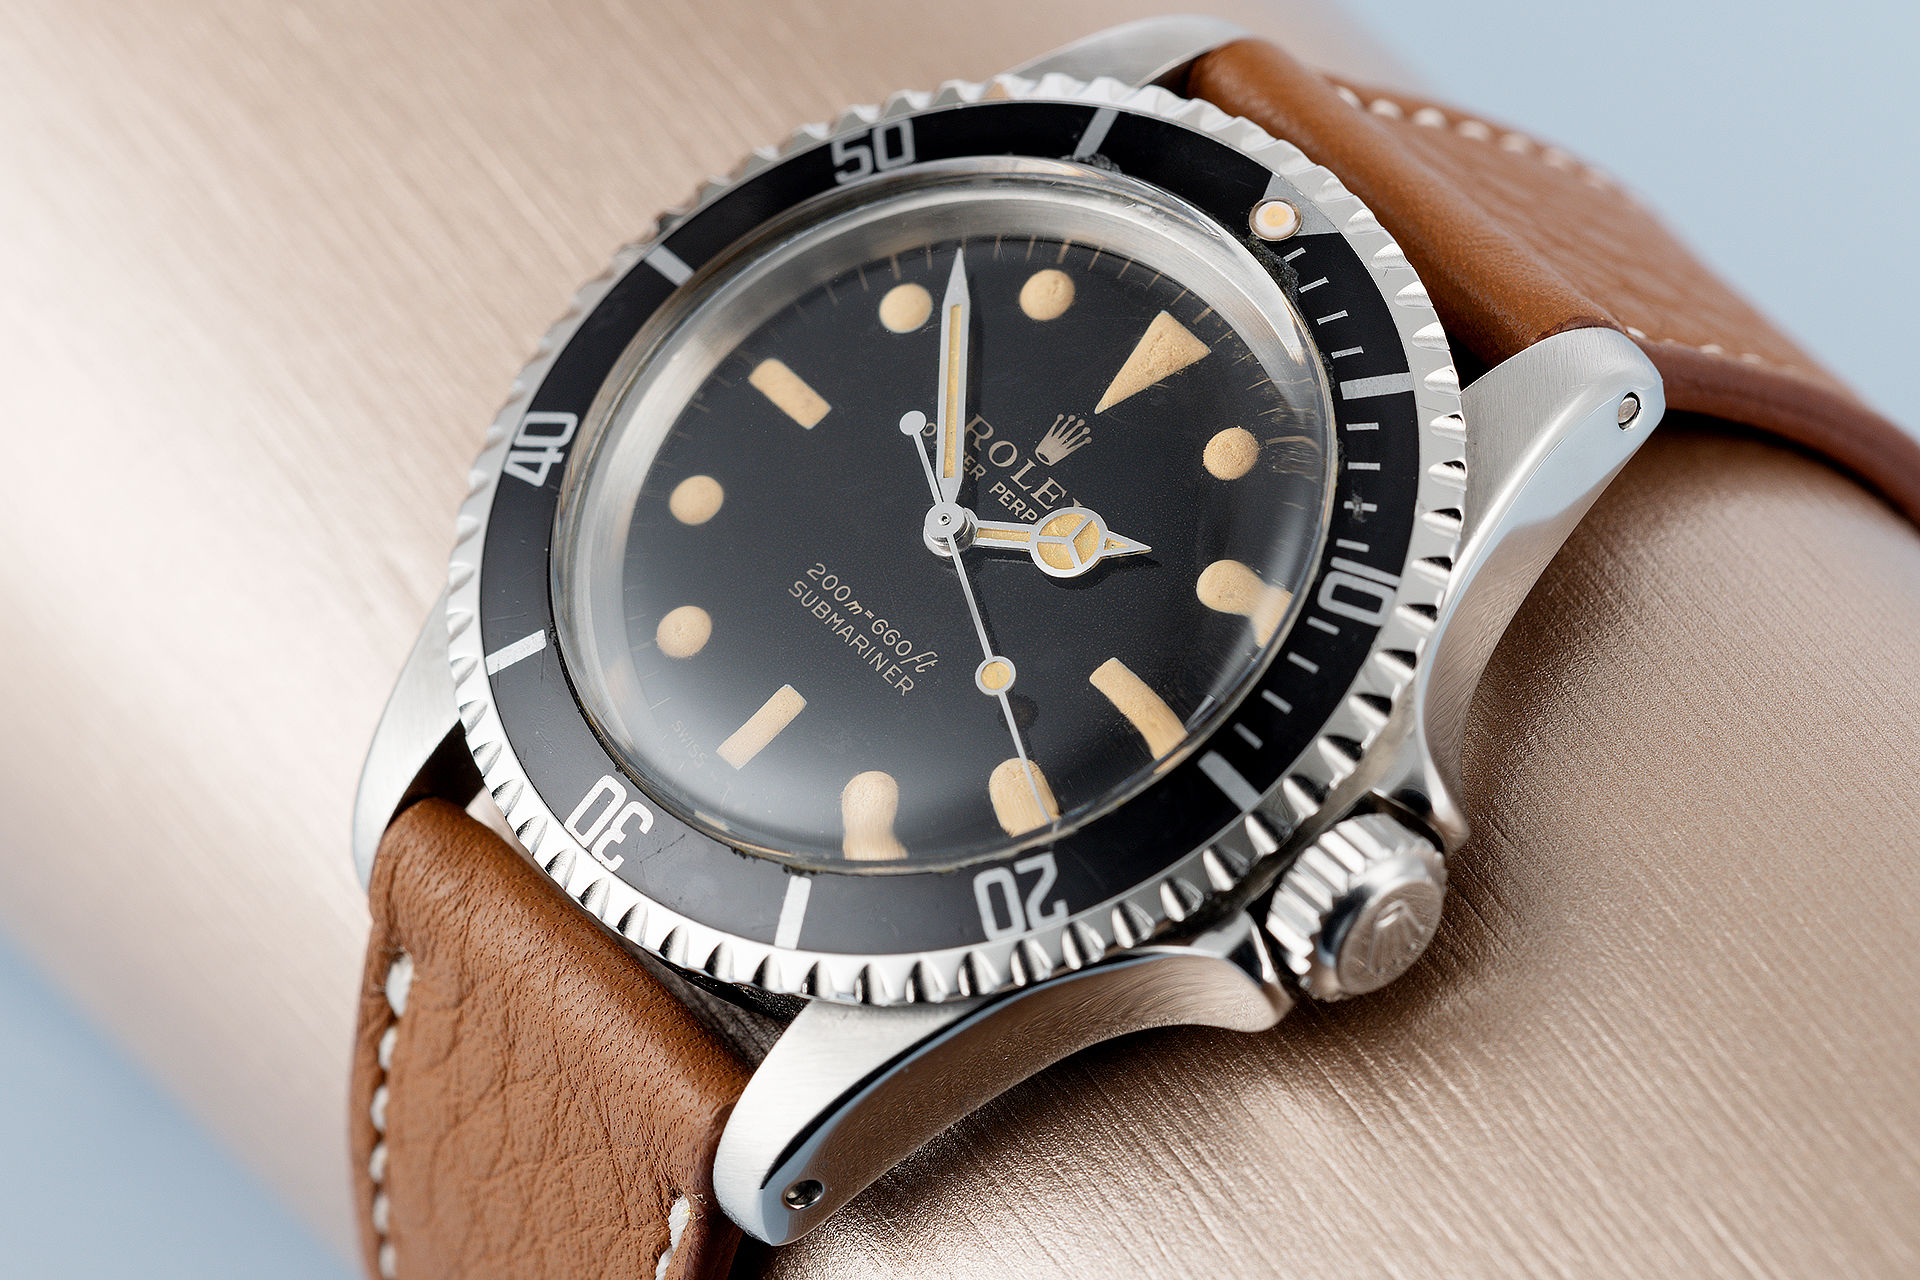 Rolex Watches ref 5513 Rare Gilt 'Metres First' Dial | Watch Club